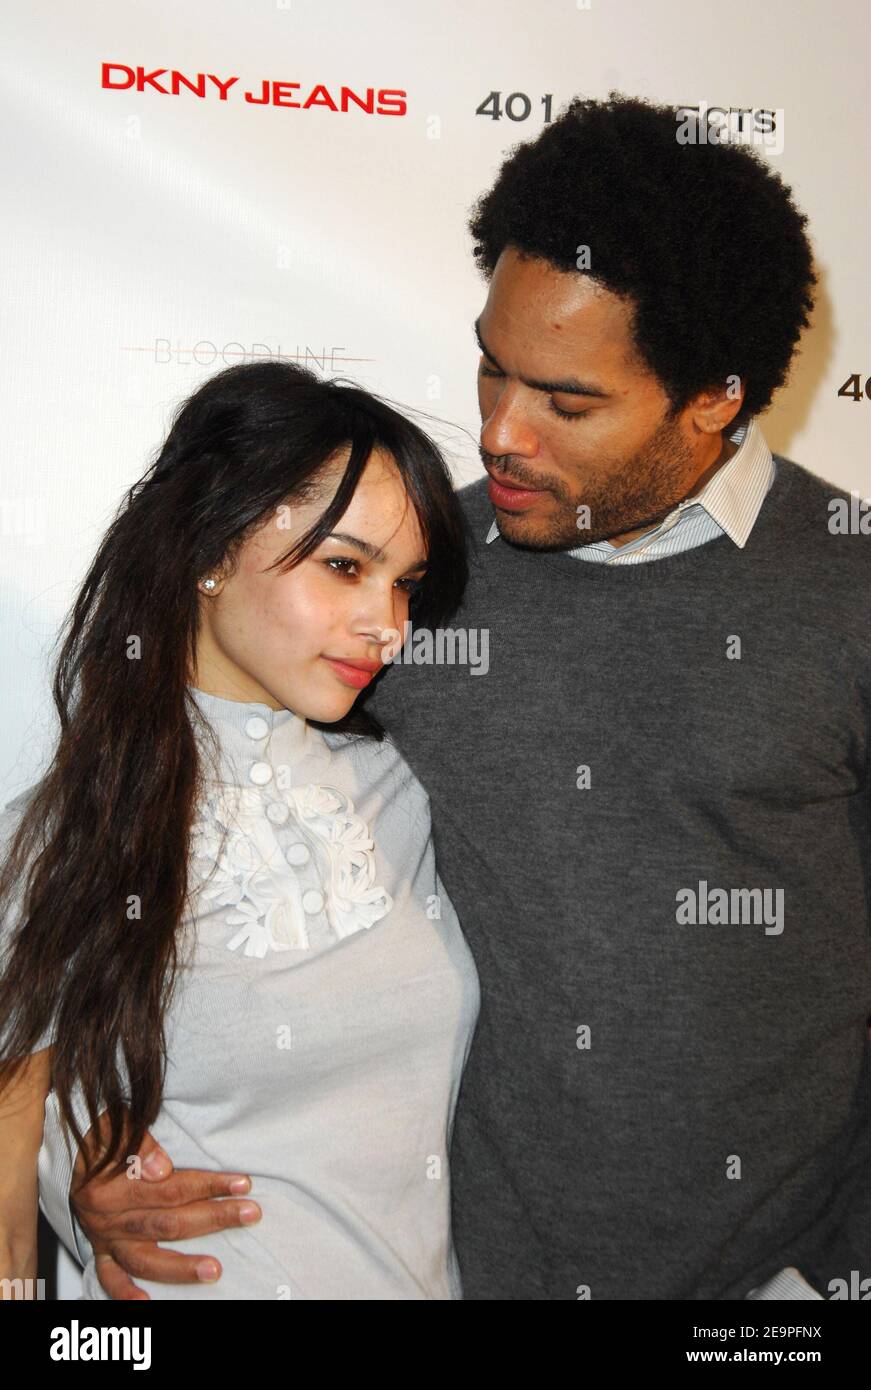 'Musician Lenny Kravitz and daughter Zoe attend the ''Bloodline'' photo exhibition launch party held at 401 Projects on Friday, December 1, 2006 in New York City, USA. (Pictured: Lenny Kravitz, Zoe Kravitz) Photo by Gregorio Binuya/ABACAUSA.COM' Stock Photo